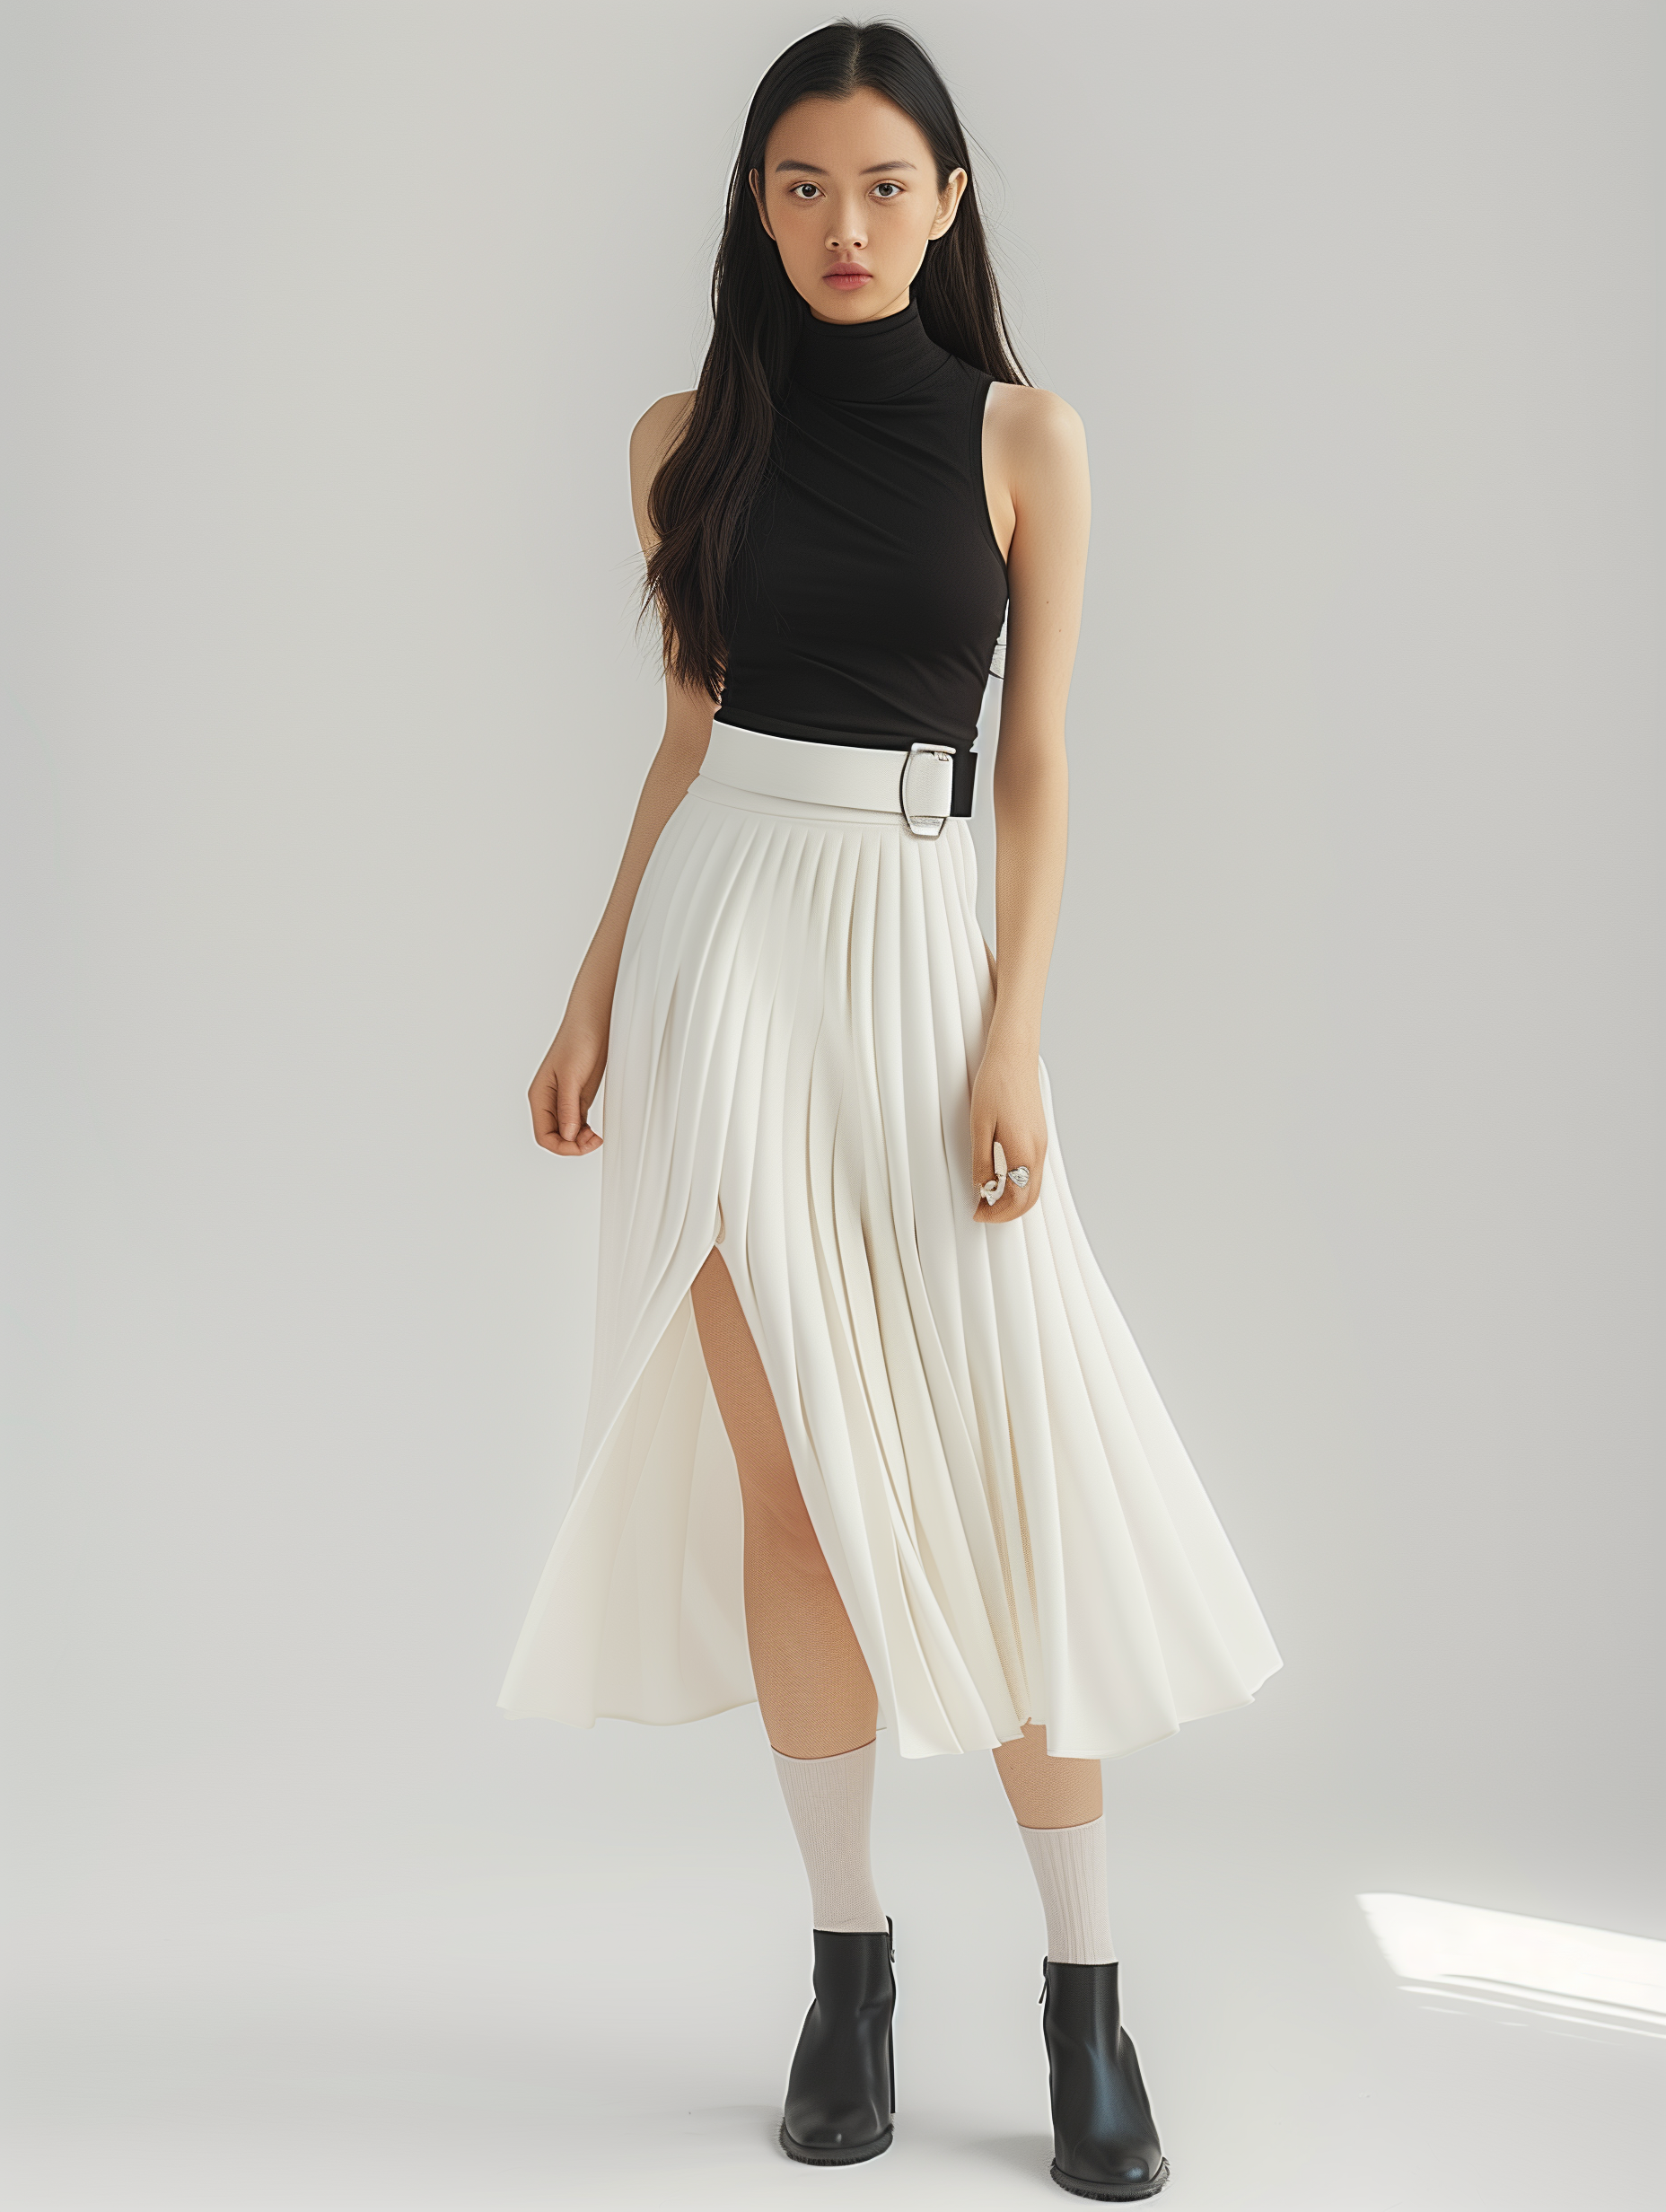 Reagan Painted Relaxed Skirt